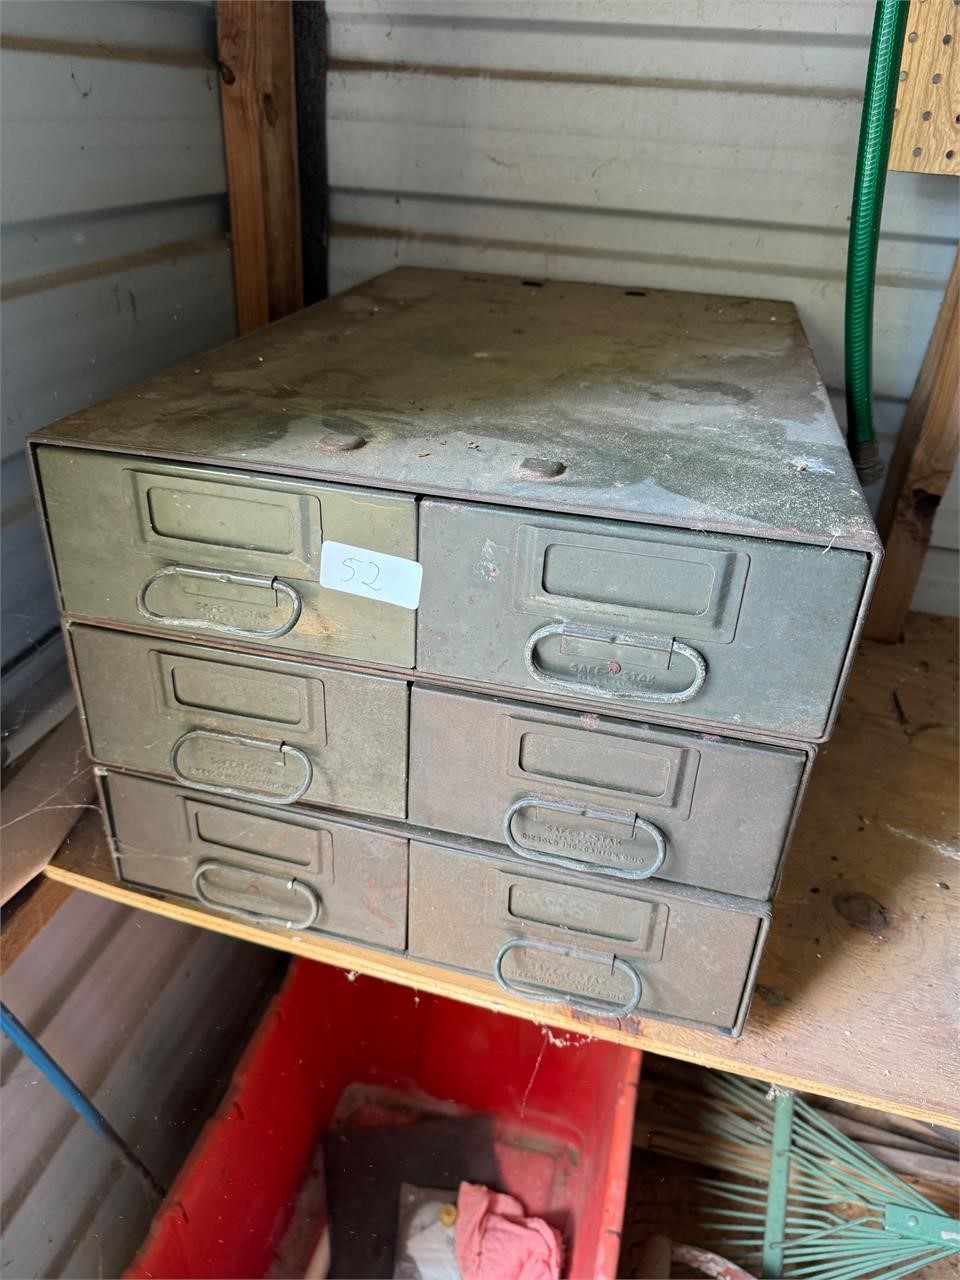 SAFE-T-STAK DRAWERS AND CONTENTS